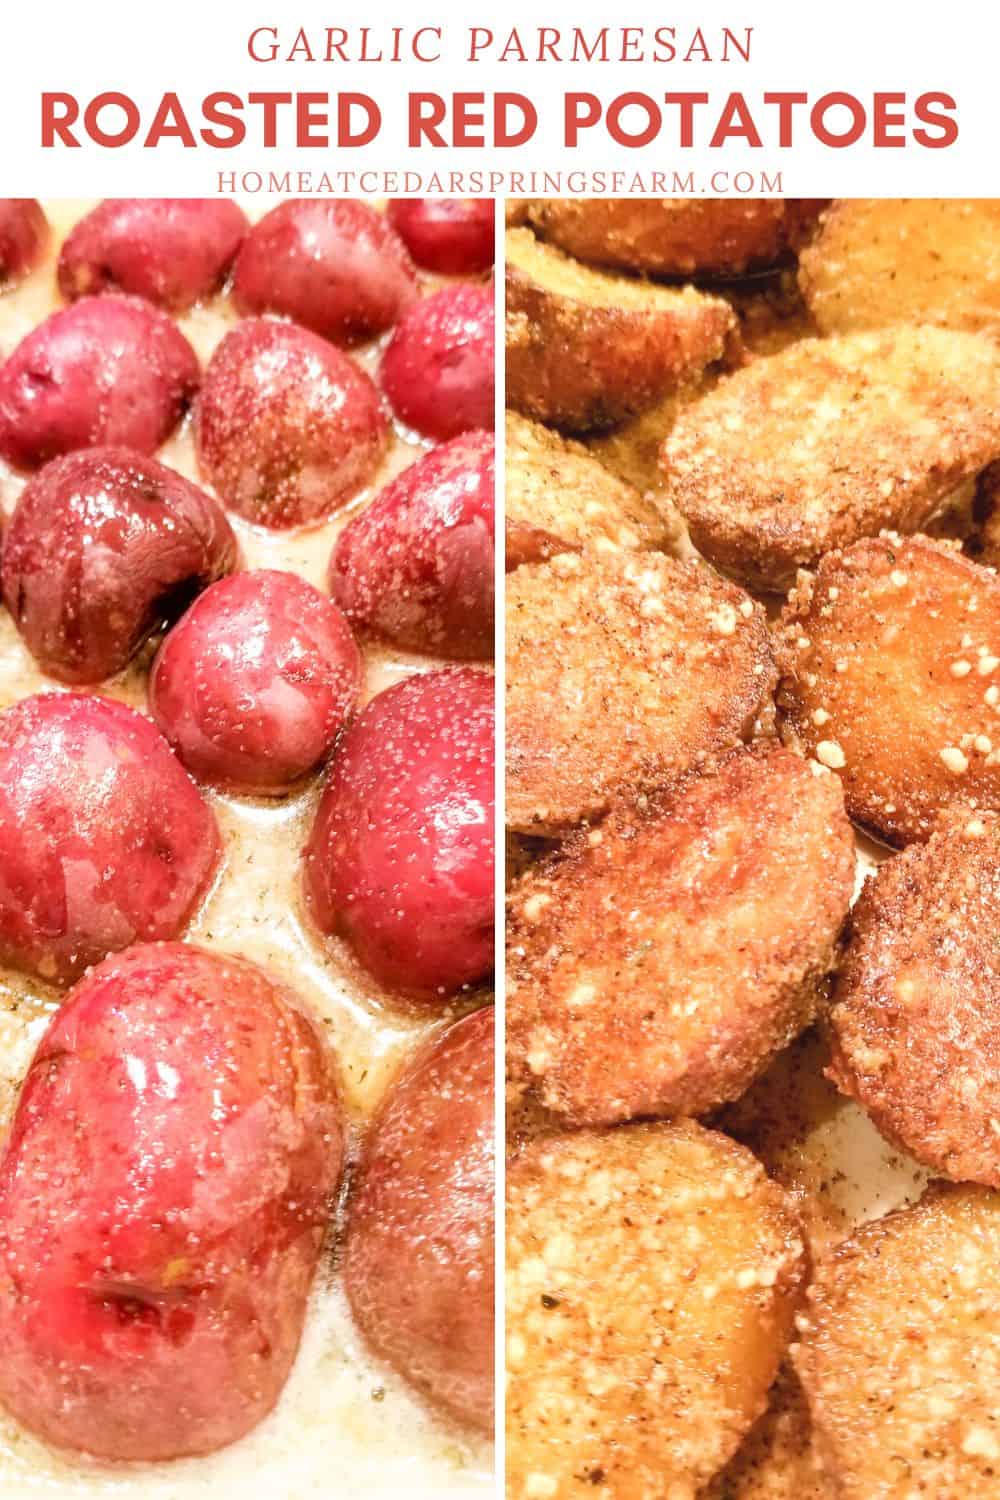 Roasted Red Potatoes before and after pictures with text overlay.